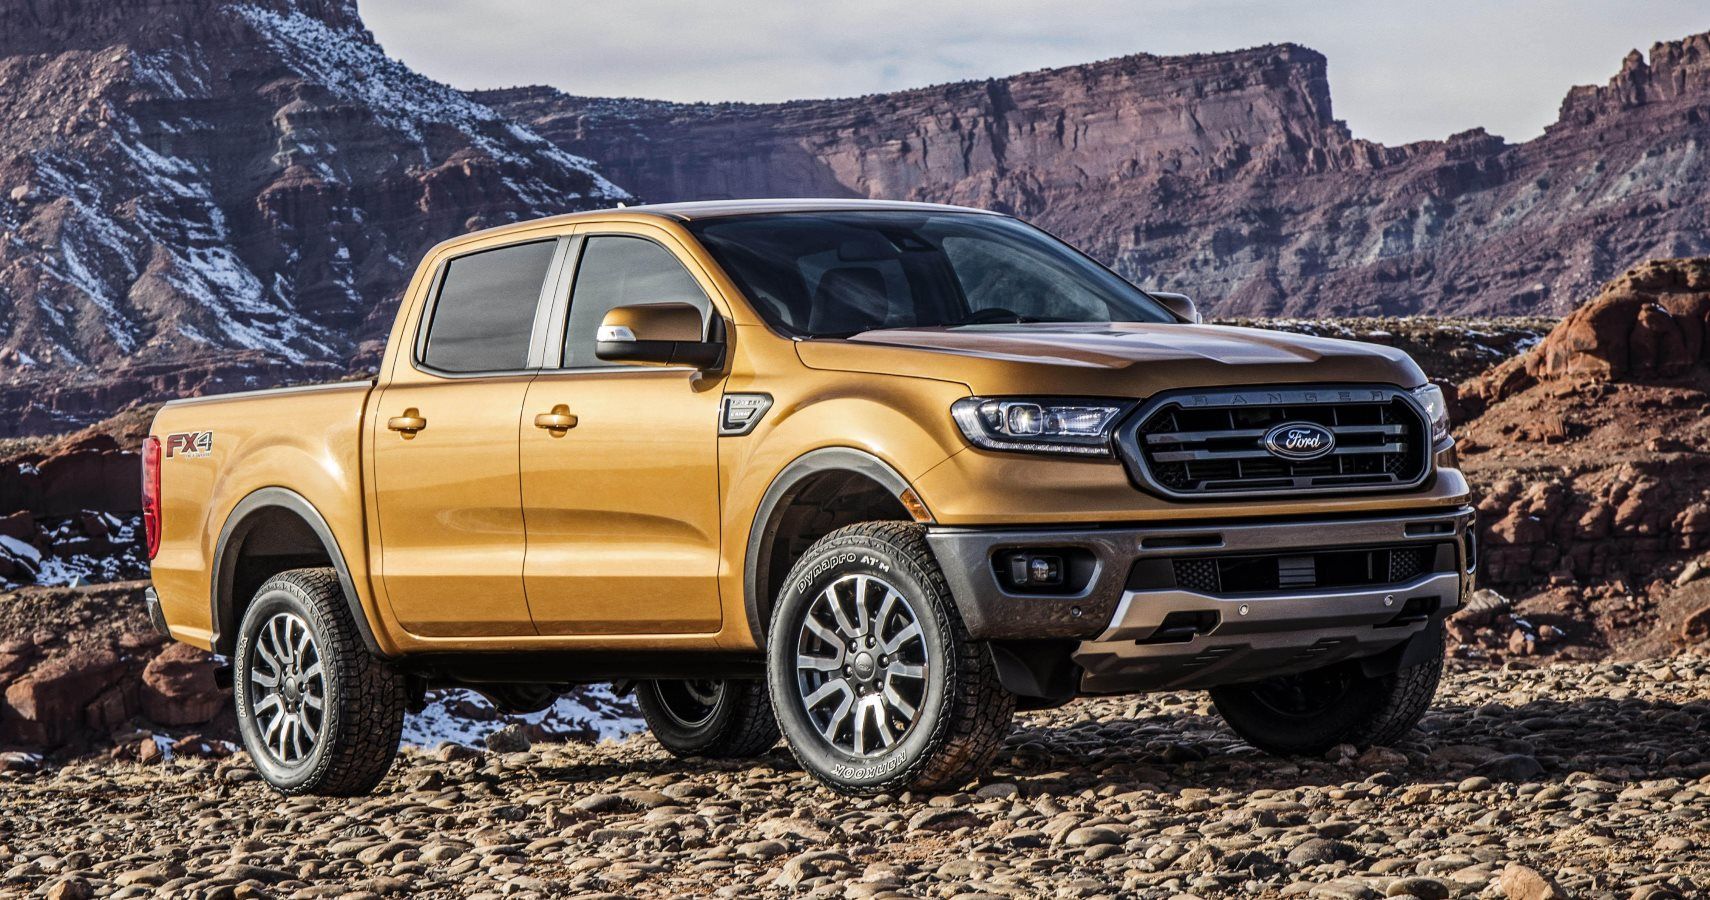 Ford’s Official Ranger Builder Went Live By Accident Revealing Competitive Price